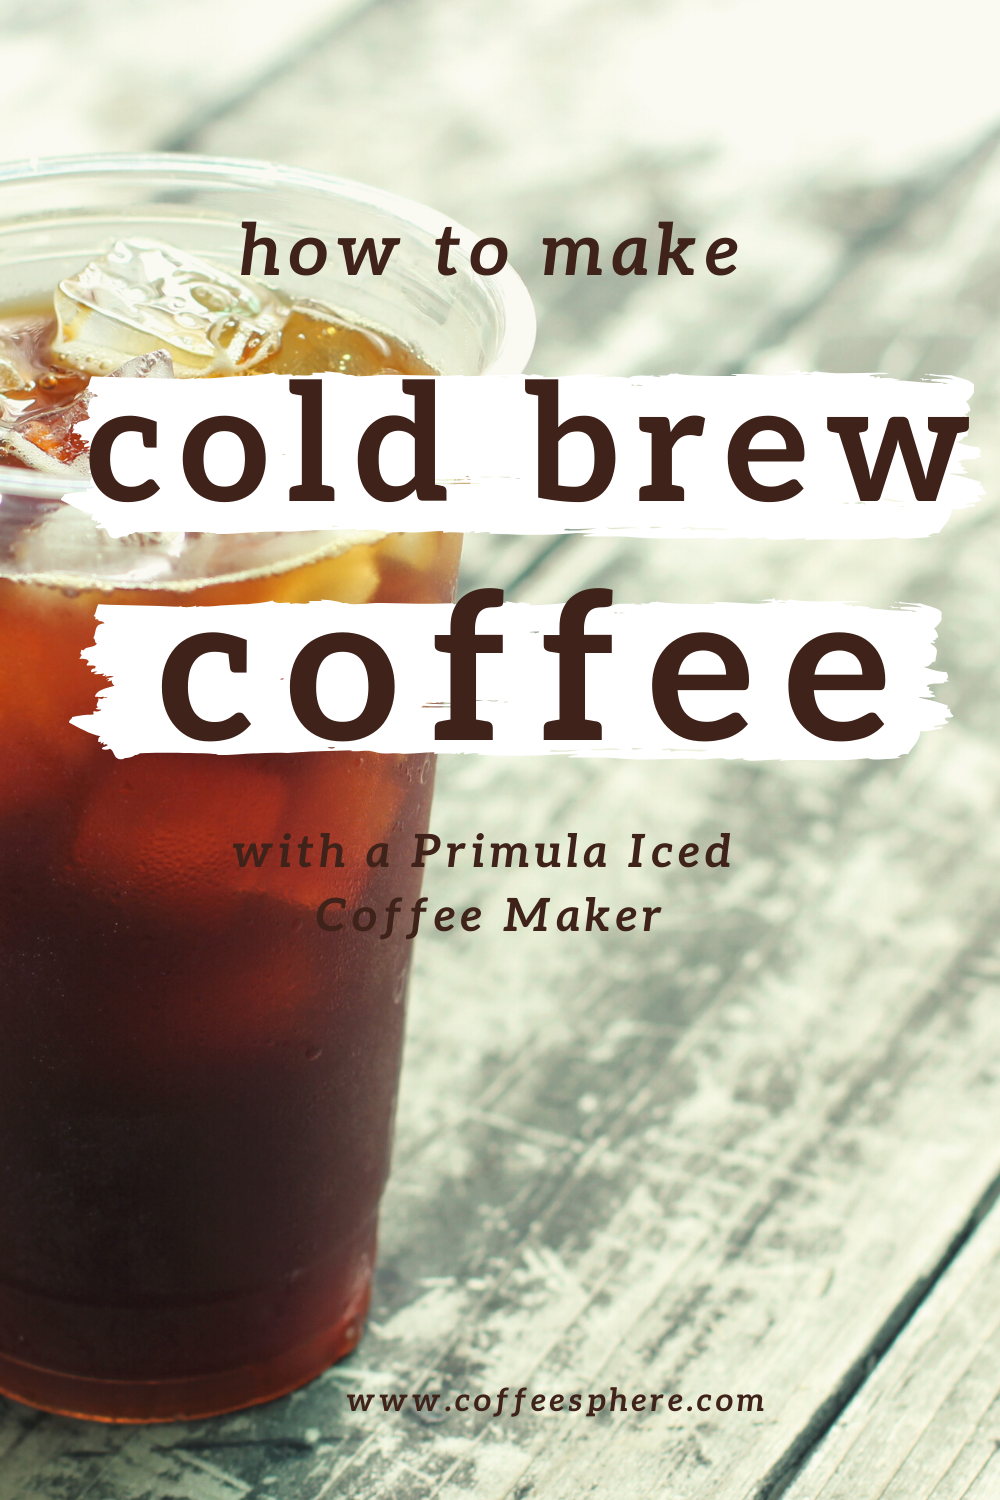 How To Make Cold Brew Coffee With Primula Iced Coffee Maker 